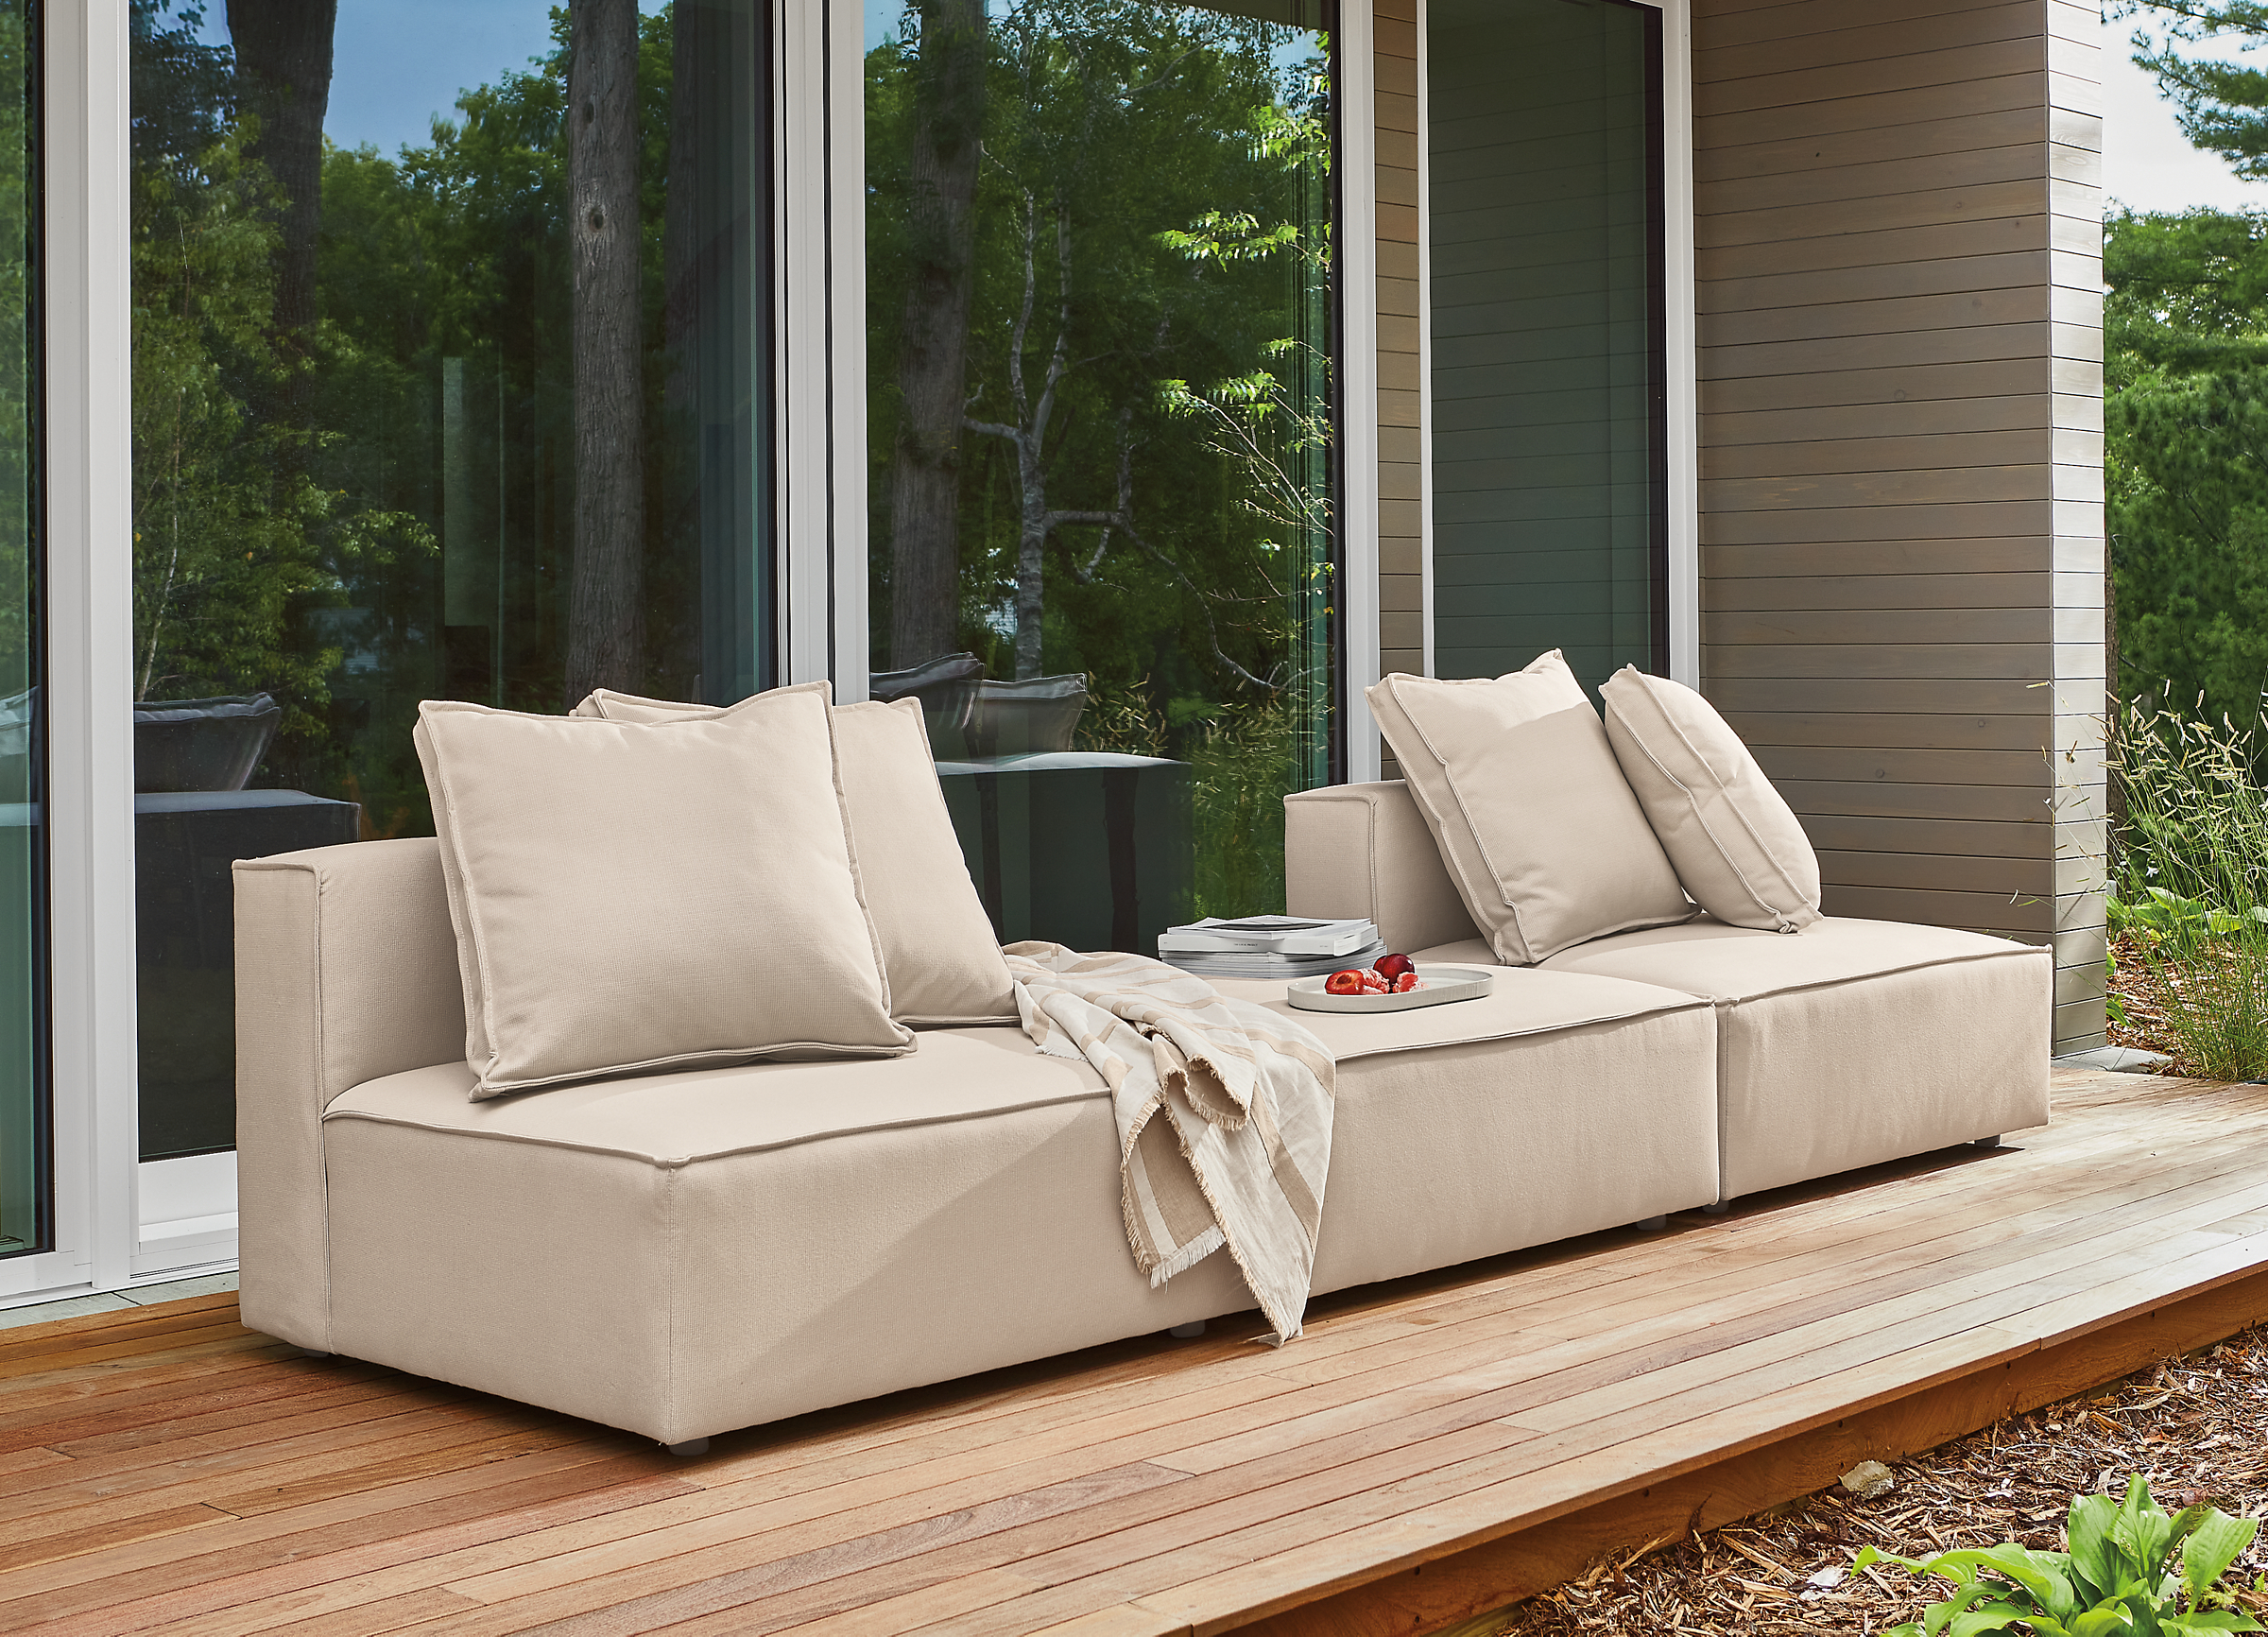 Outdoor space with Oasis armless chairs and Oasis ottoman.